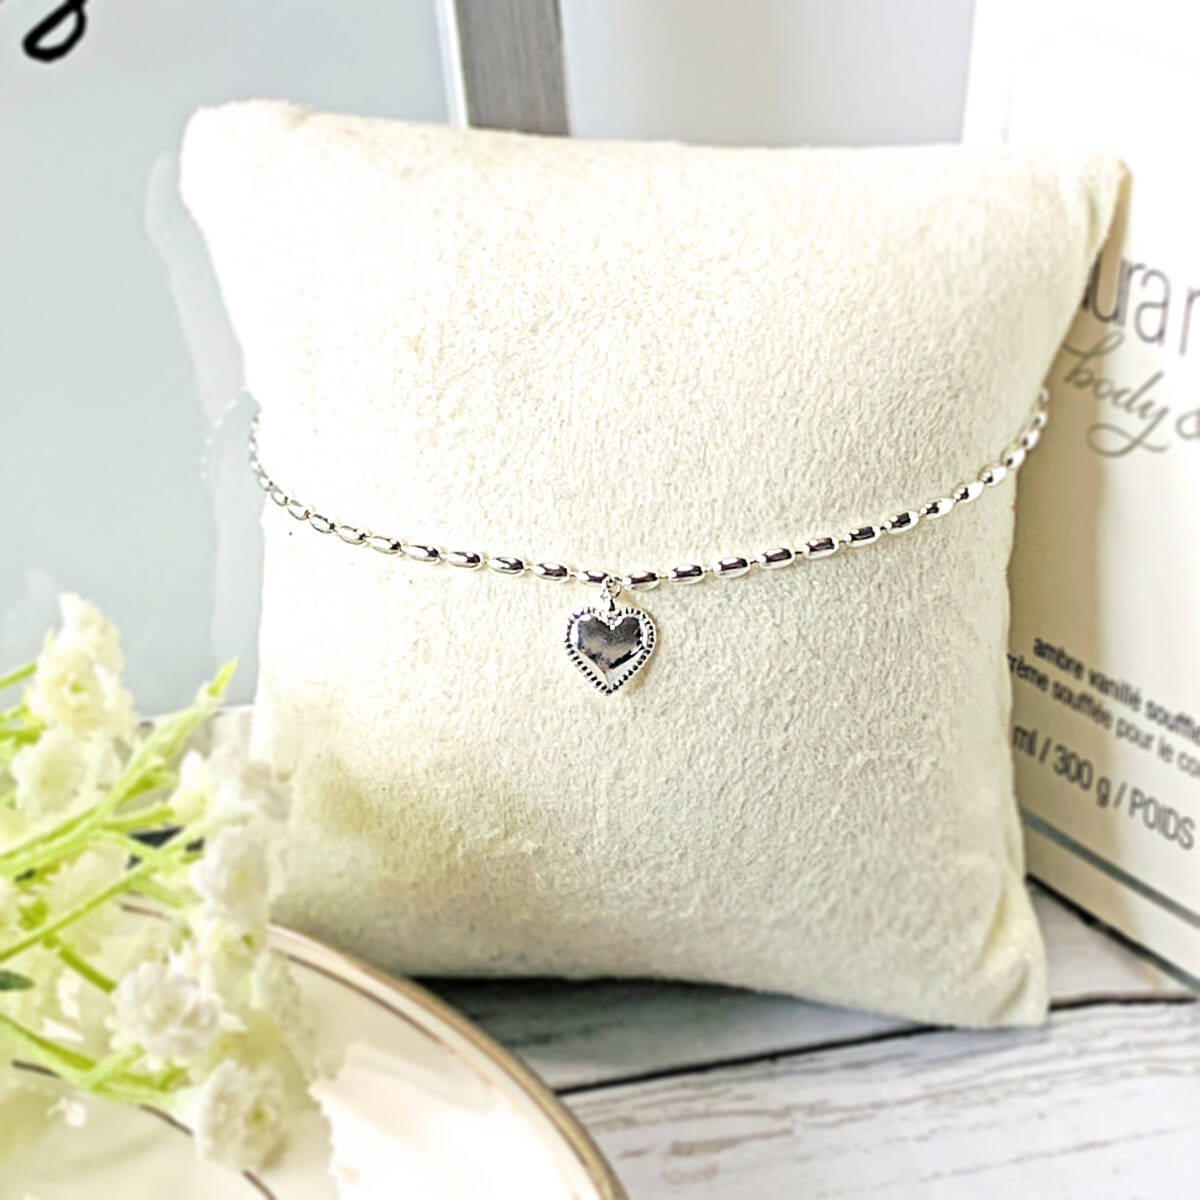 Silver925 Heart anklet silver accessory present gift present SV925 sterling silver original silver silver 925 birthday summer 